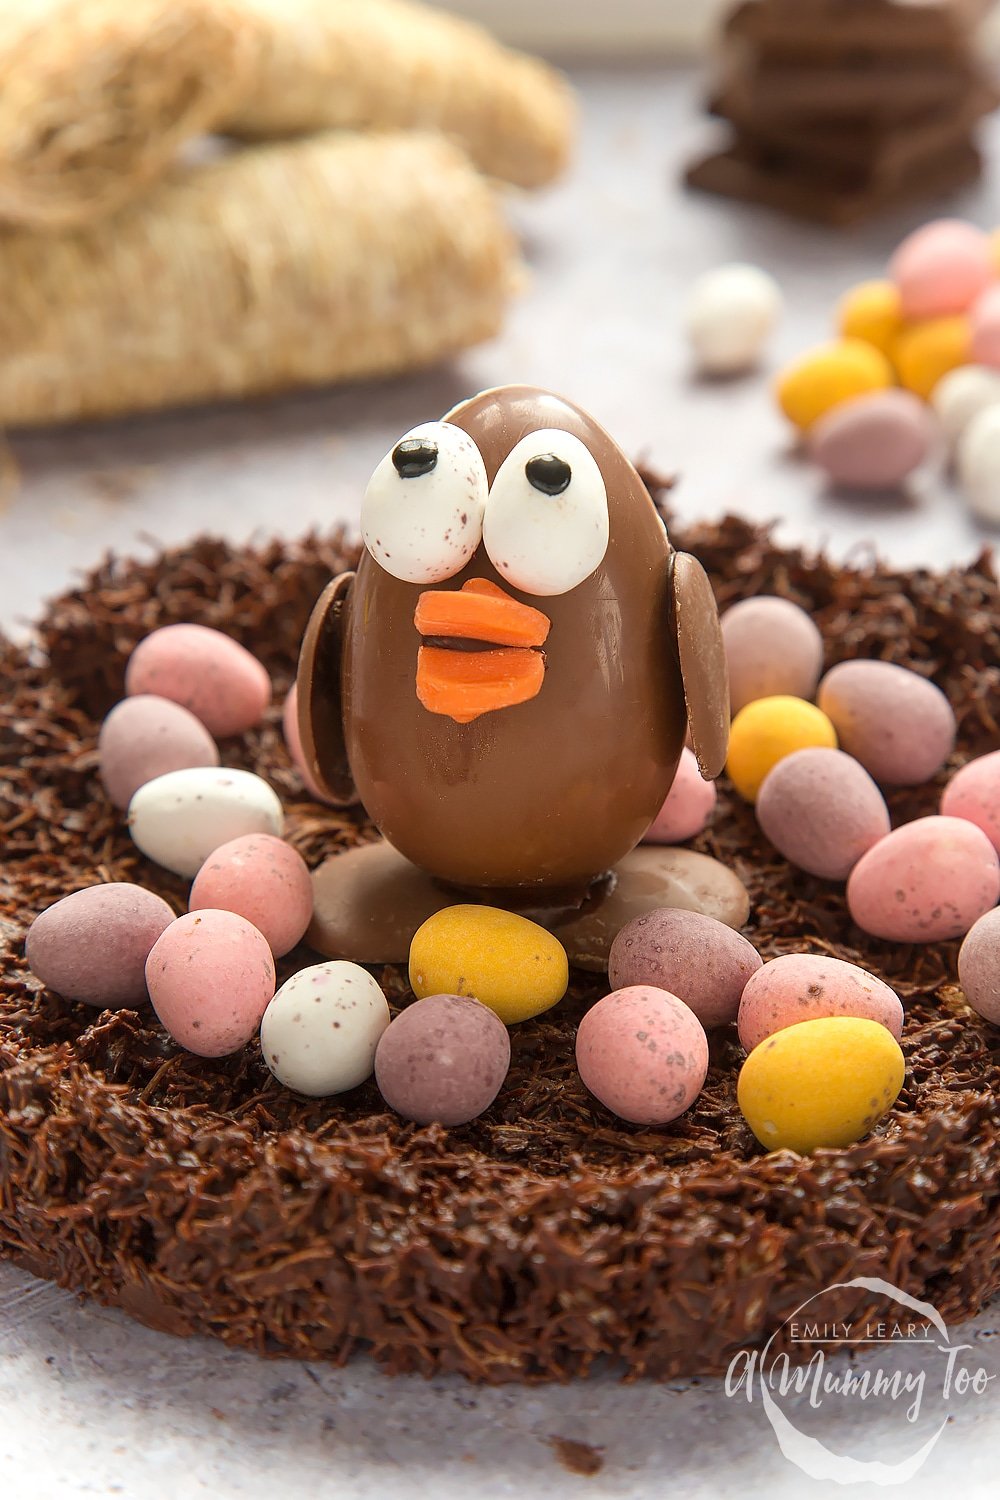 This adorable Easter egg chocolate chick is surrounded by mini eggs on a shredded wheat base. A fun Easter craft for the whole family to enjoy.